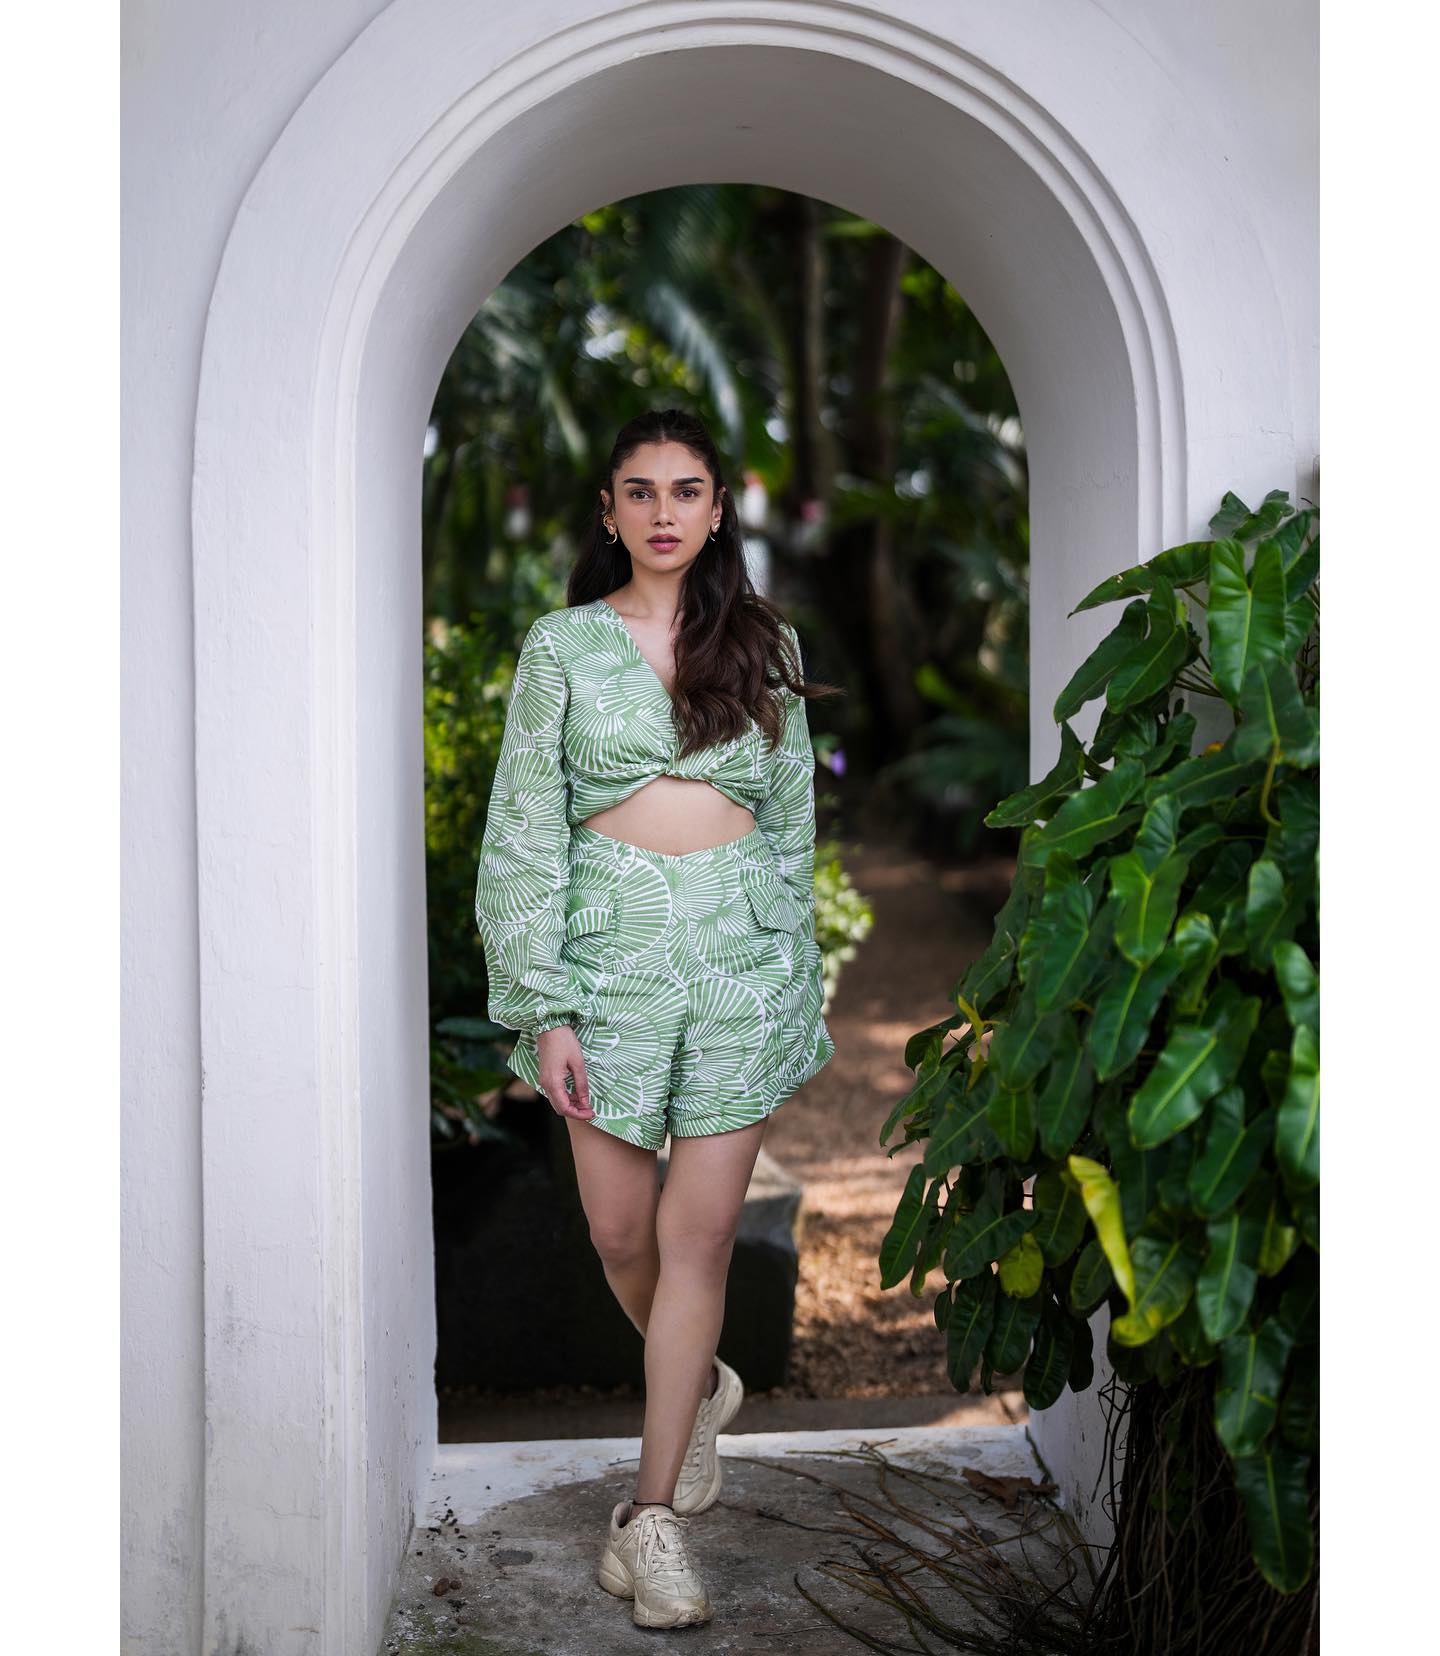 5 striking co-ord sets to steal from Aditi Rao Hydari's closet - See photos